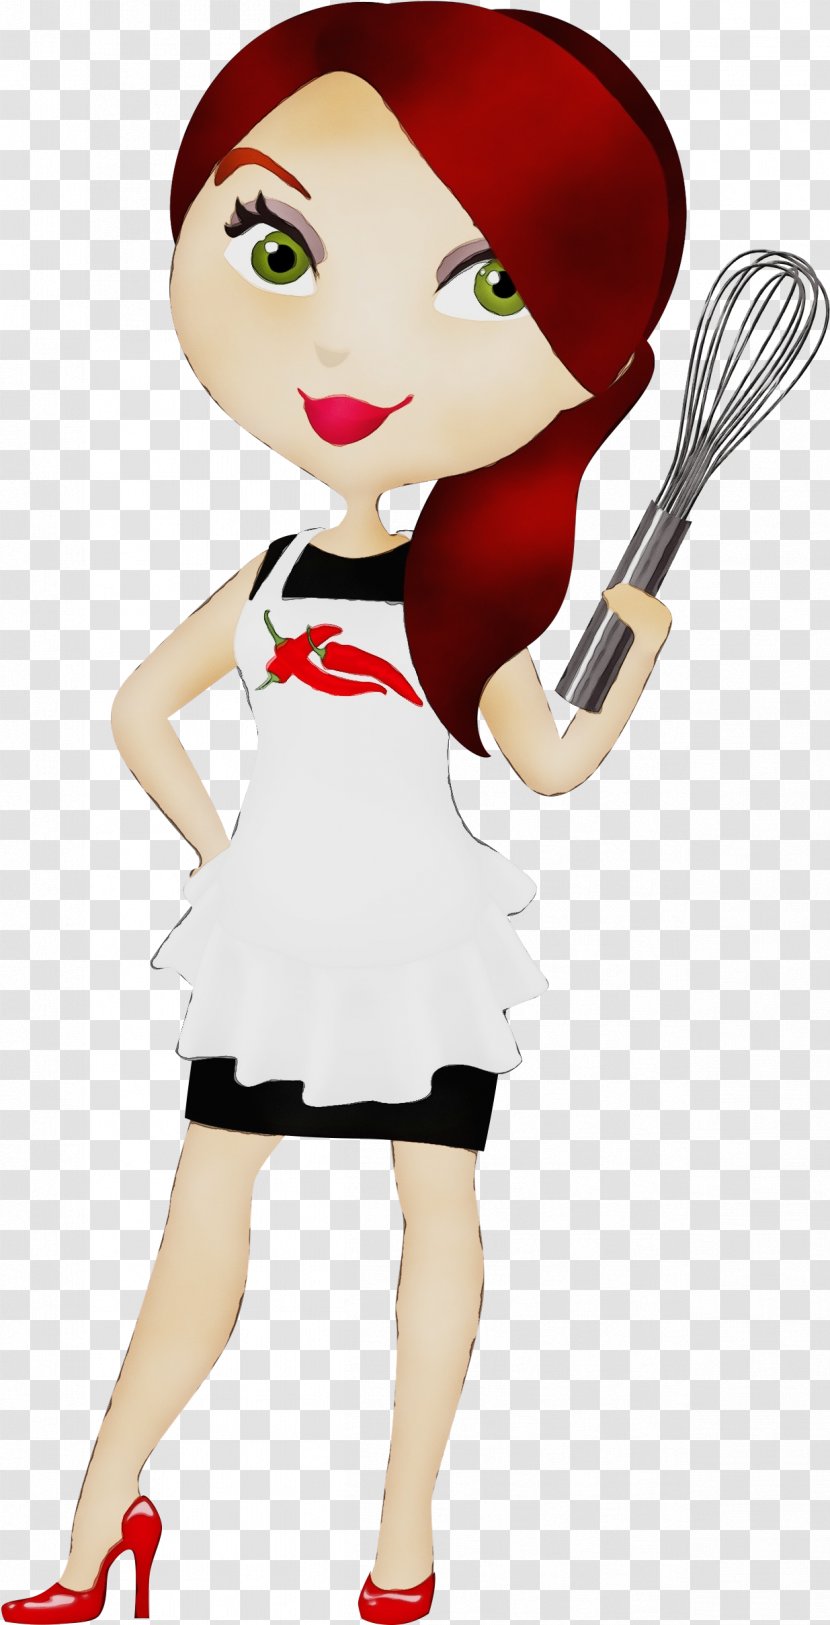 Chef Cartoon Cooking Transparency Food - Style - Charwoman Transparent PNG